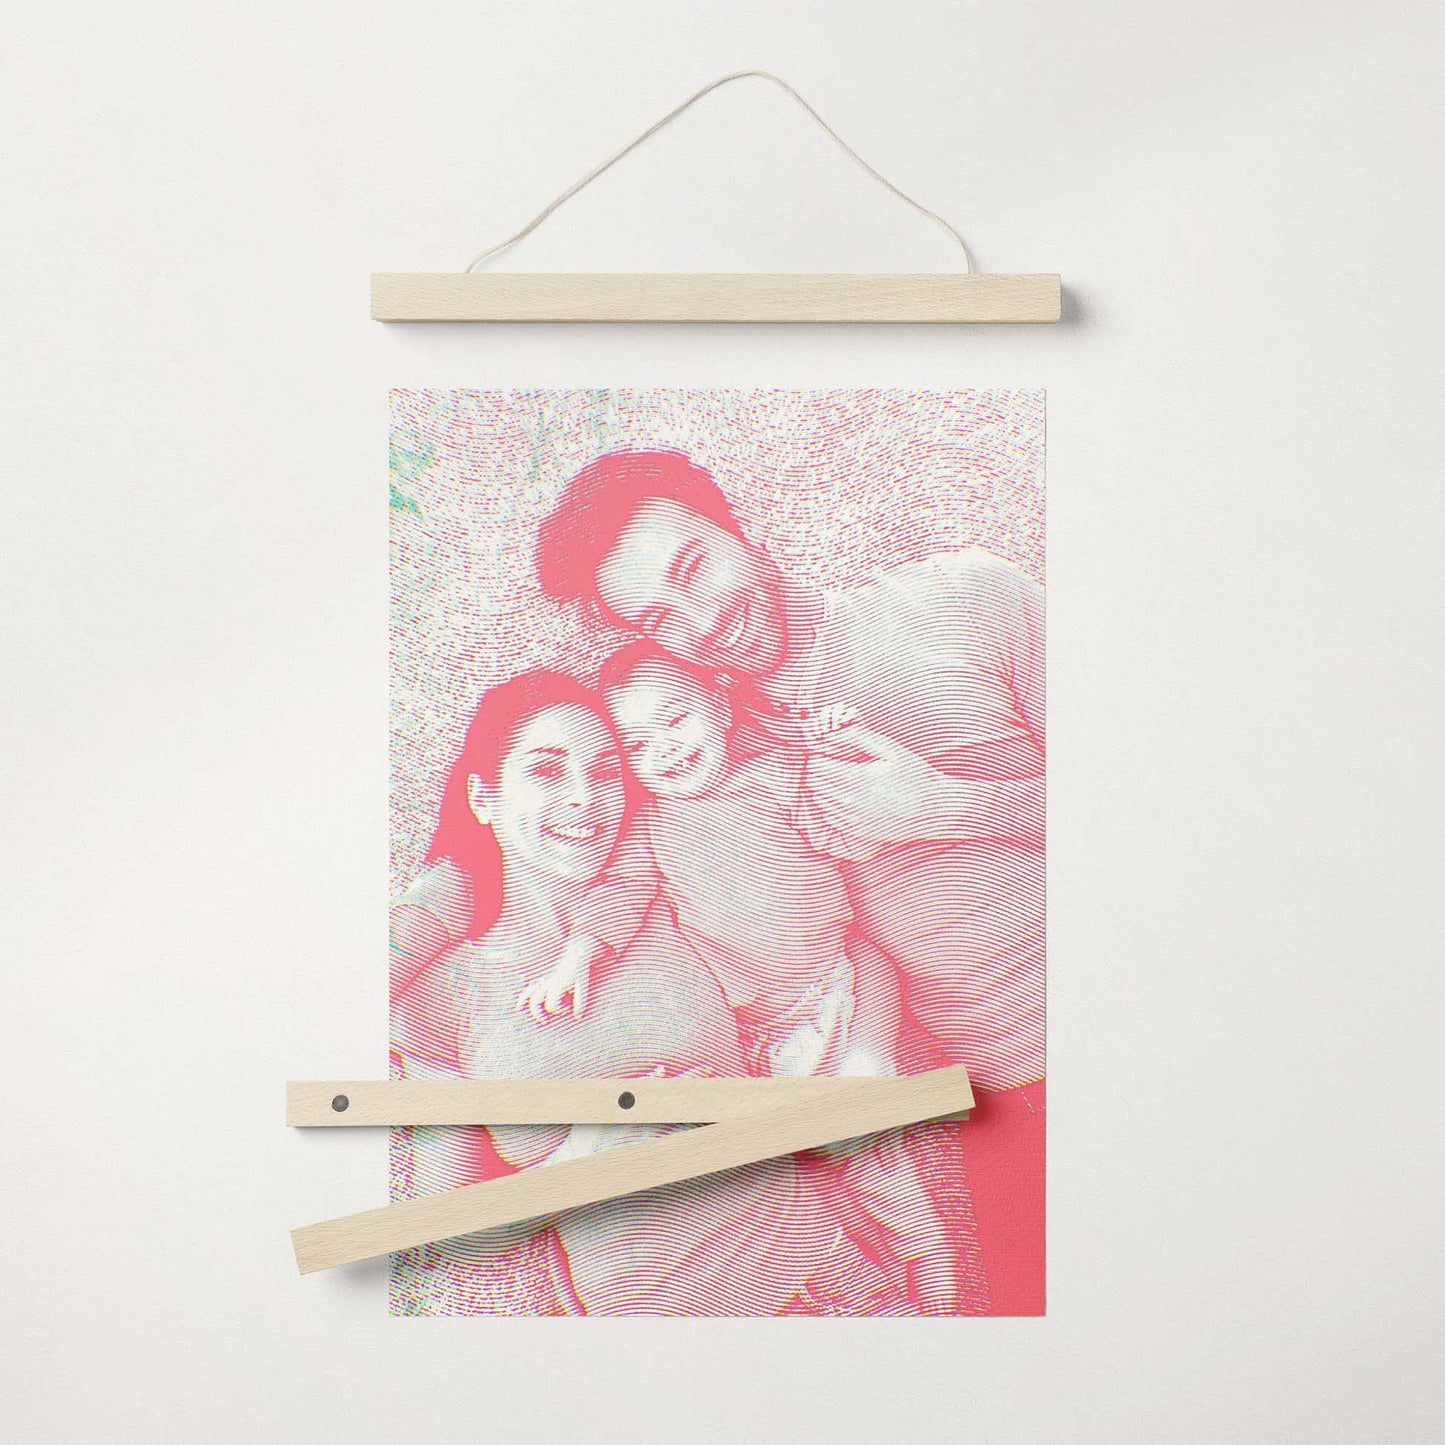 Share Joy and Laughter: Our Personalised Pink Engraving Poster Hanger makes a wonderful gift for family and friends. The vibrant colors and joyful design will bring smiles and laughter to their faces